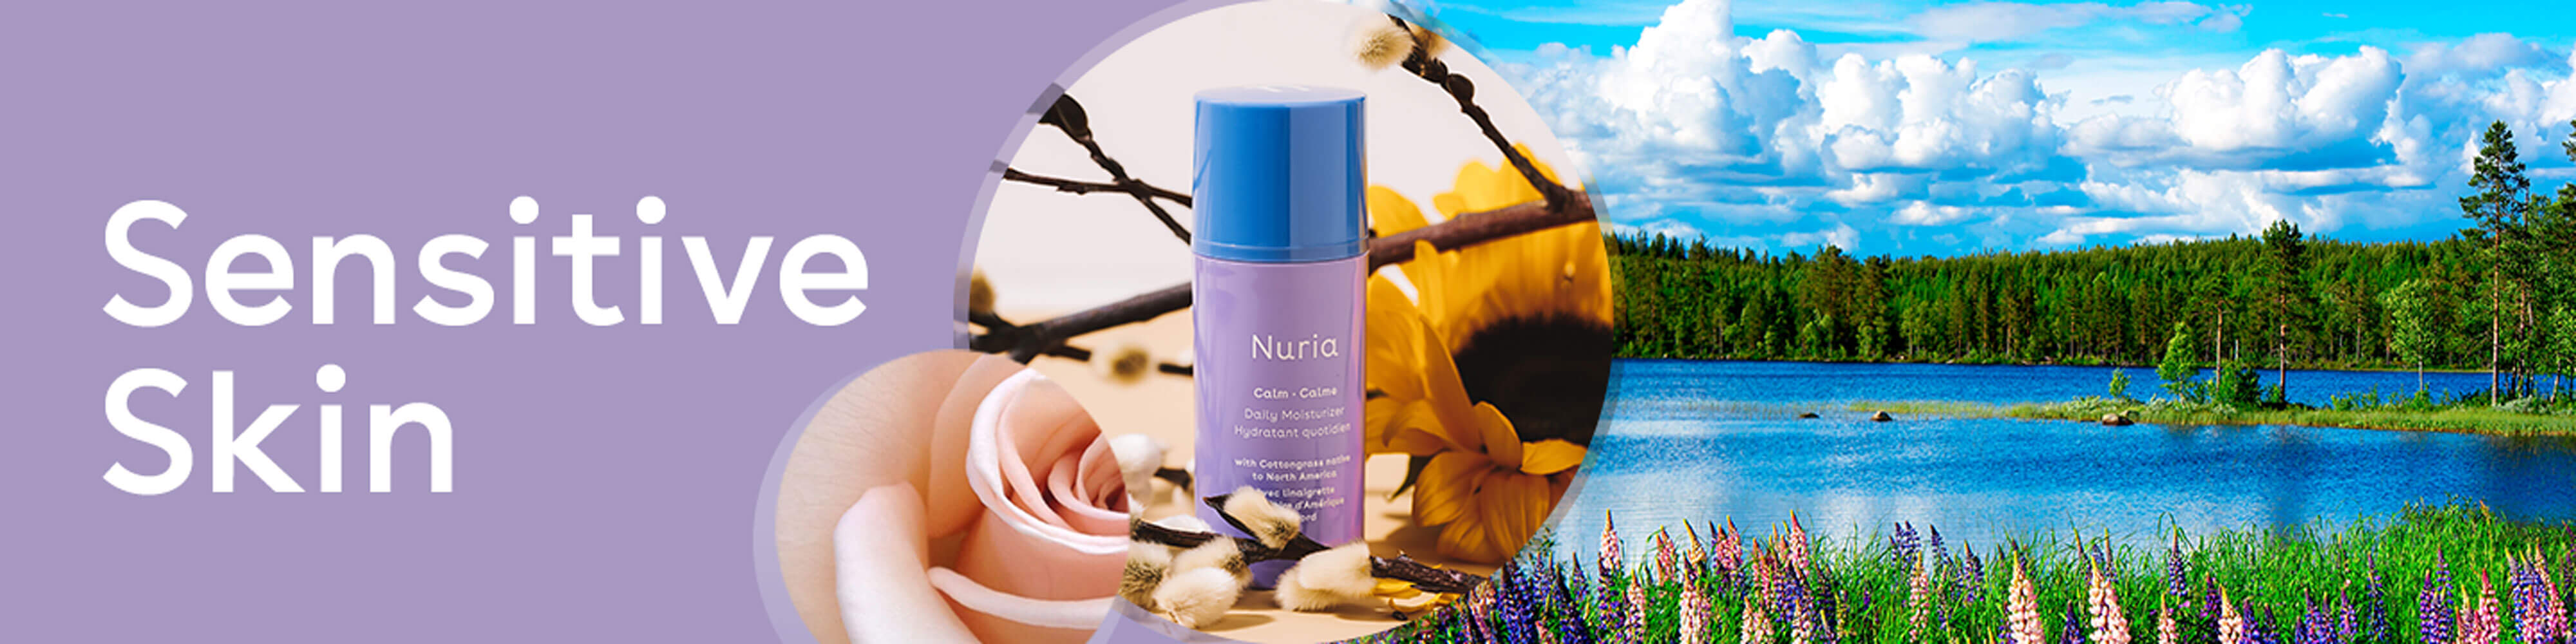 Sensitive Skin - Nuria's products for your skin concerns